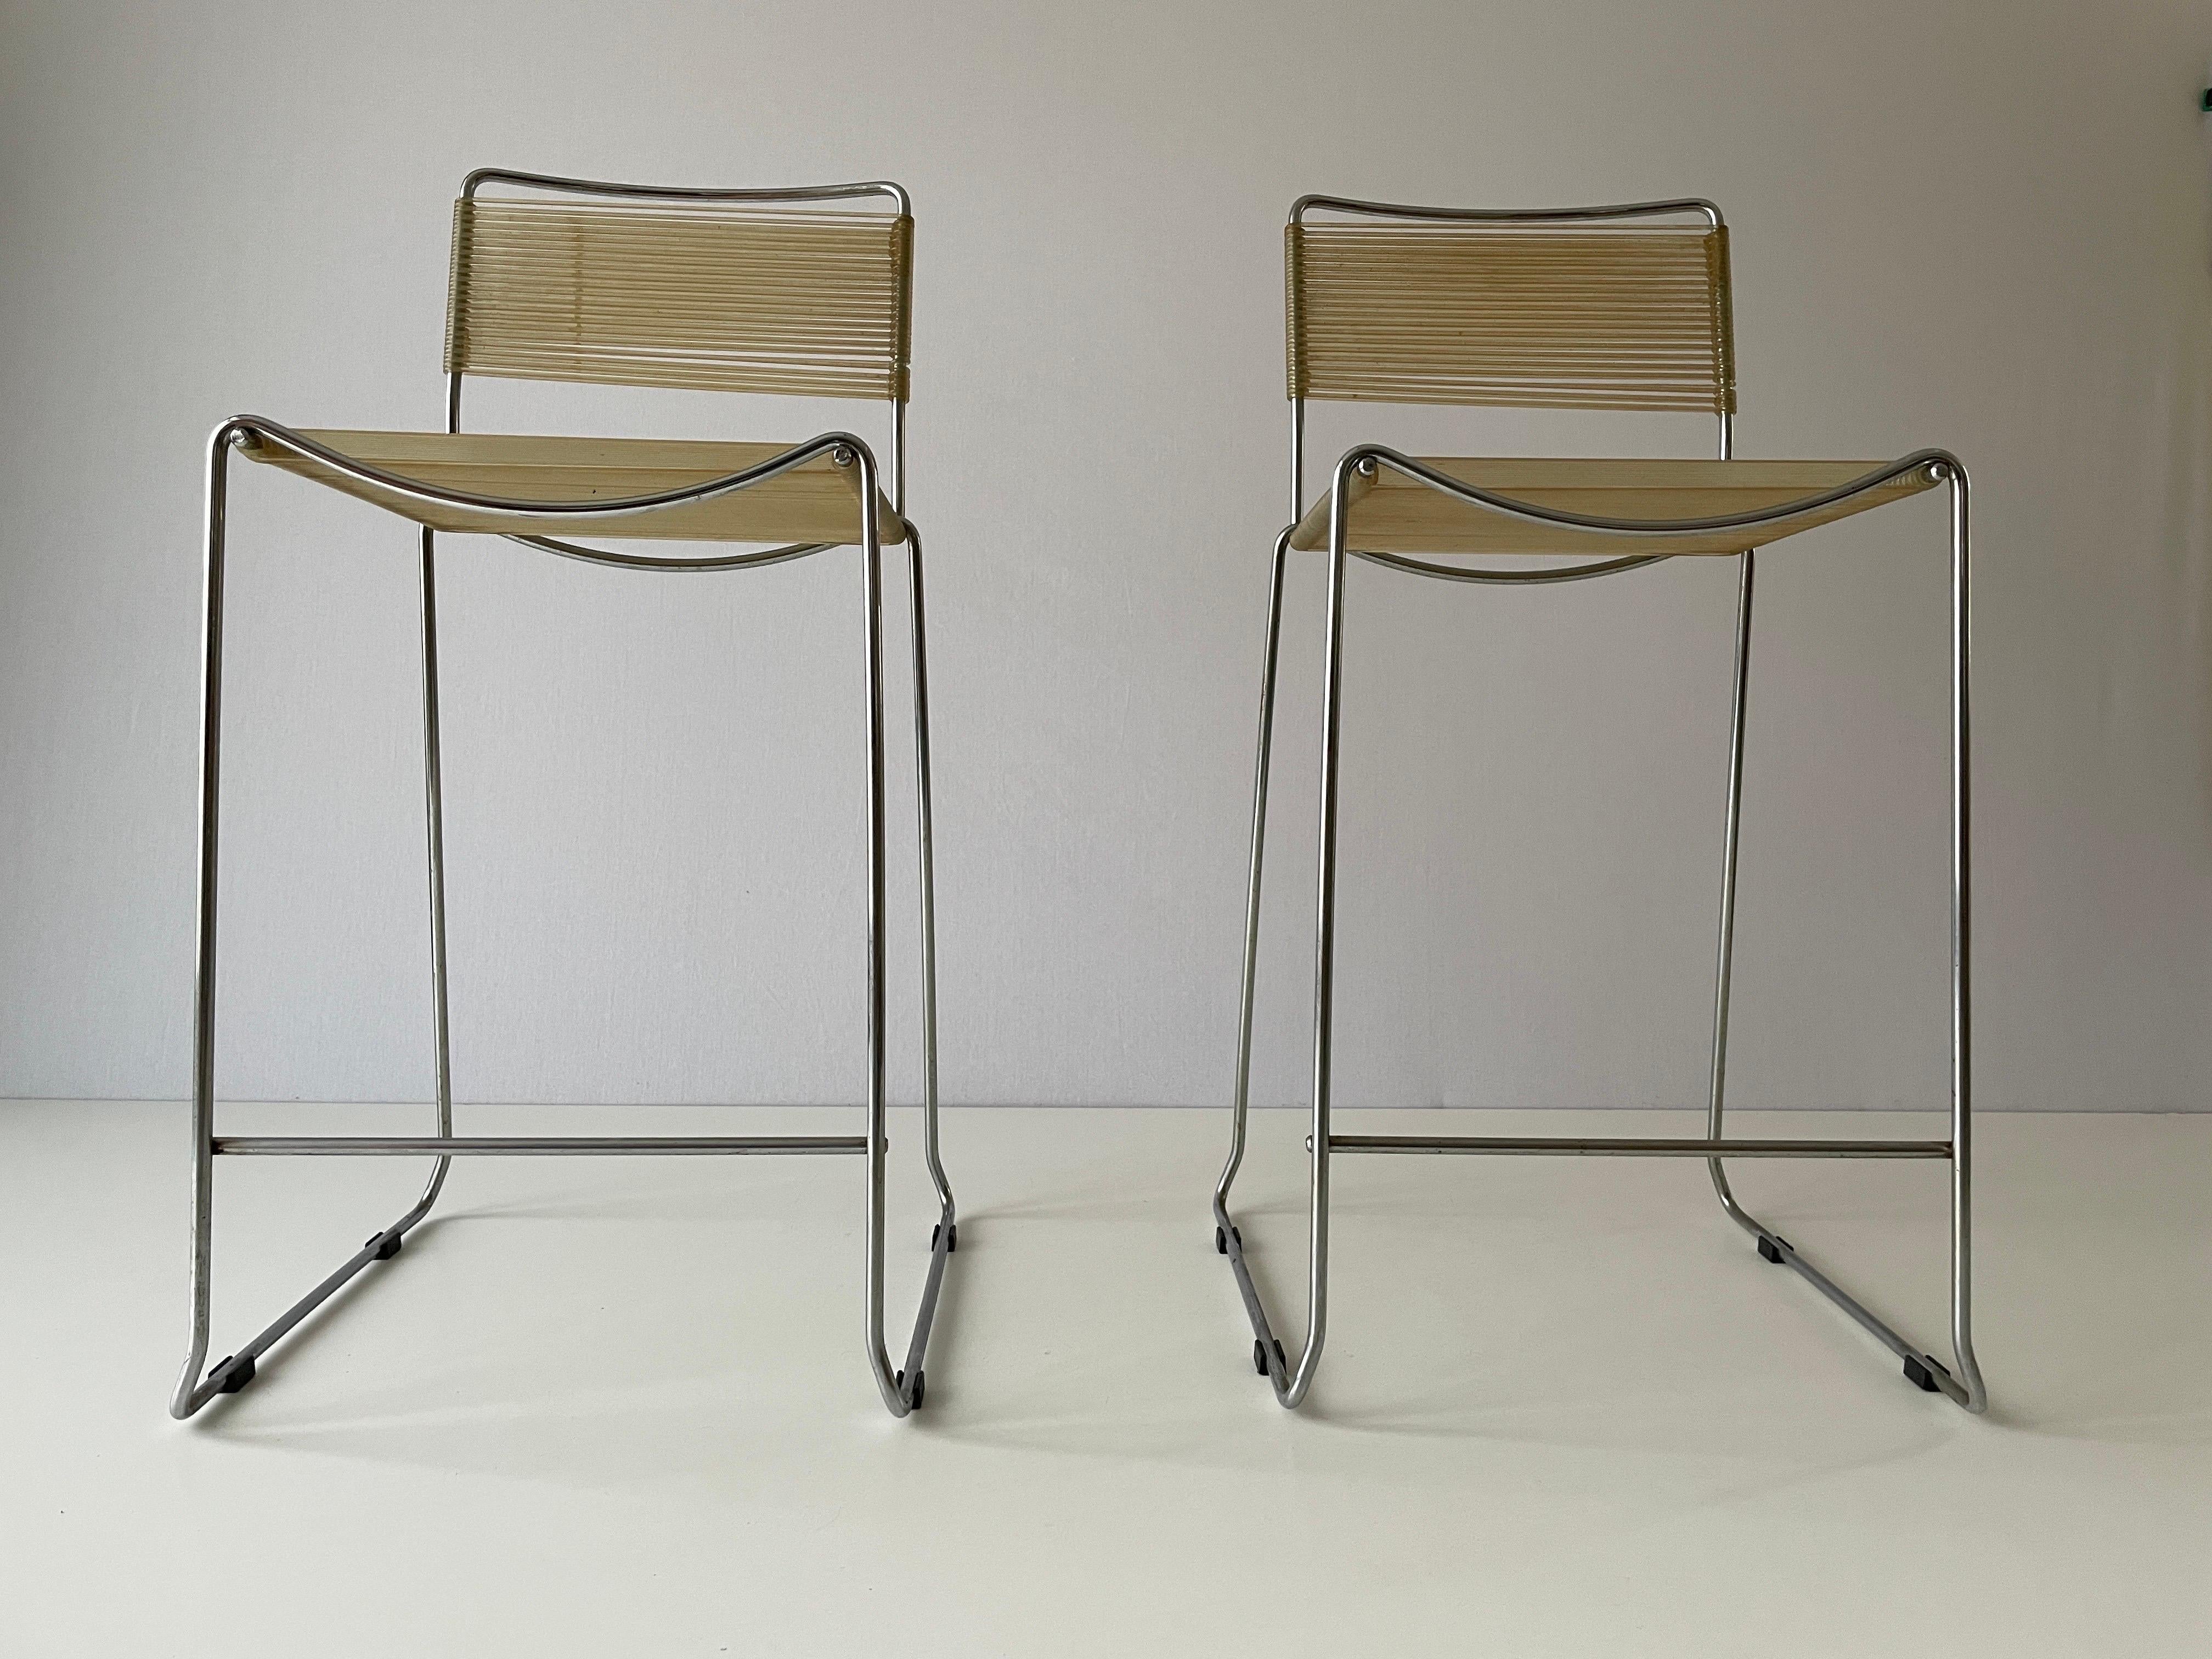 Iconic Italian Spaghetti Bar Chairs, 1970s, Italy

Wear consistent with age and use.

Measurements: 
Height: 90 cm
Width: 42 cm
Depth: 45 cm
Seating height: 62 cm